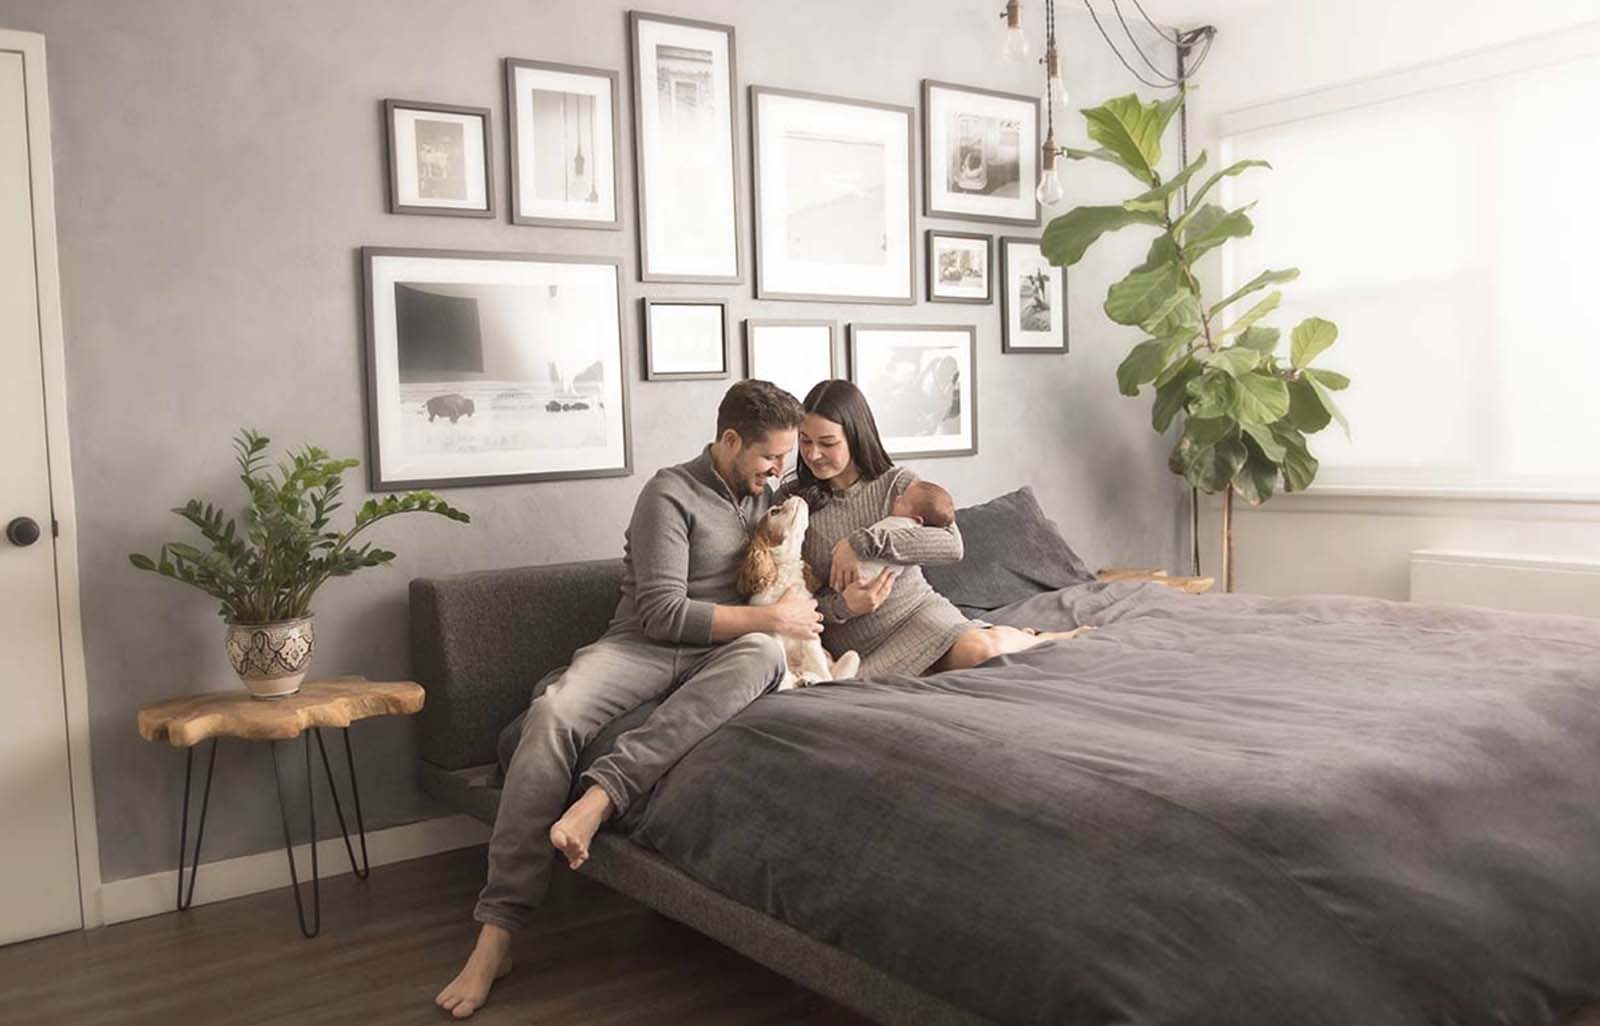 Family sharing a moment with their baby - Today's Trends in baby photography 